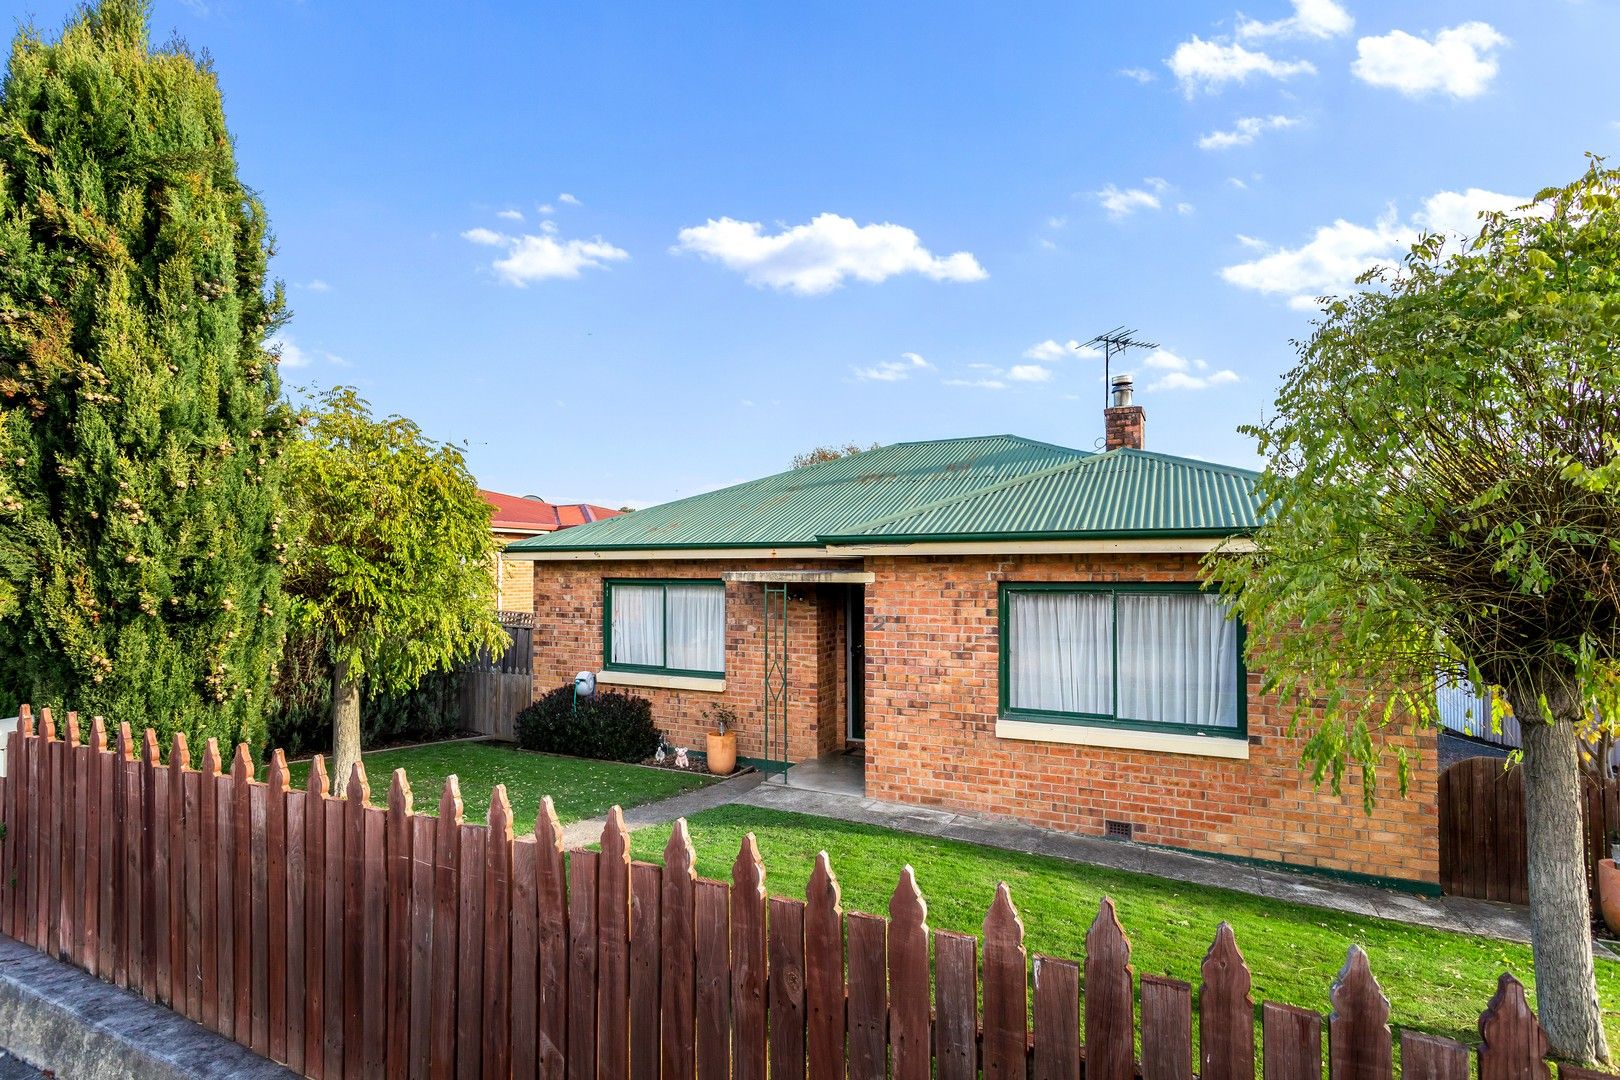 2 bedrooms House in 2 Keithleigh St YOUNGTOWN TAS, 7249